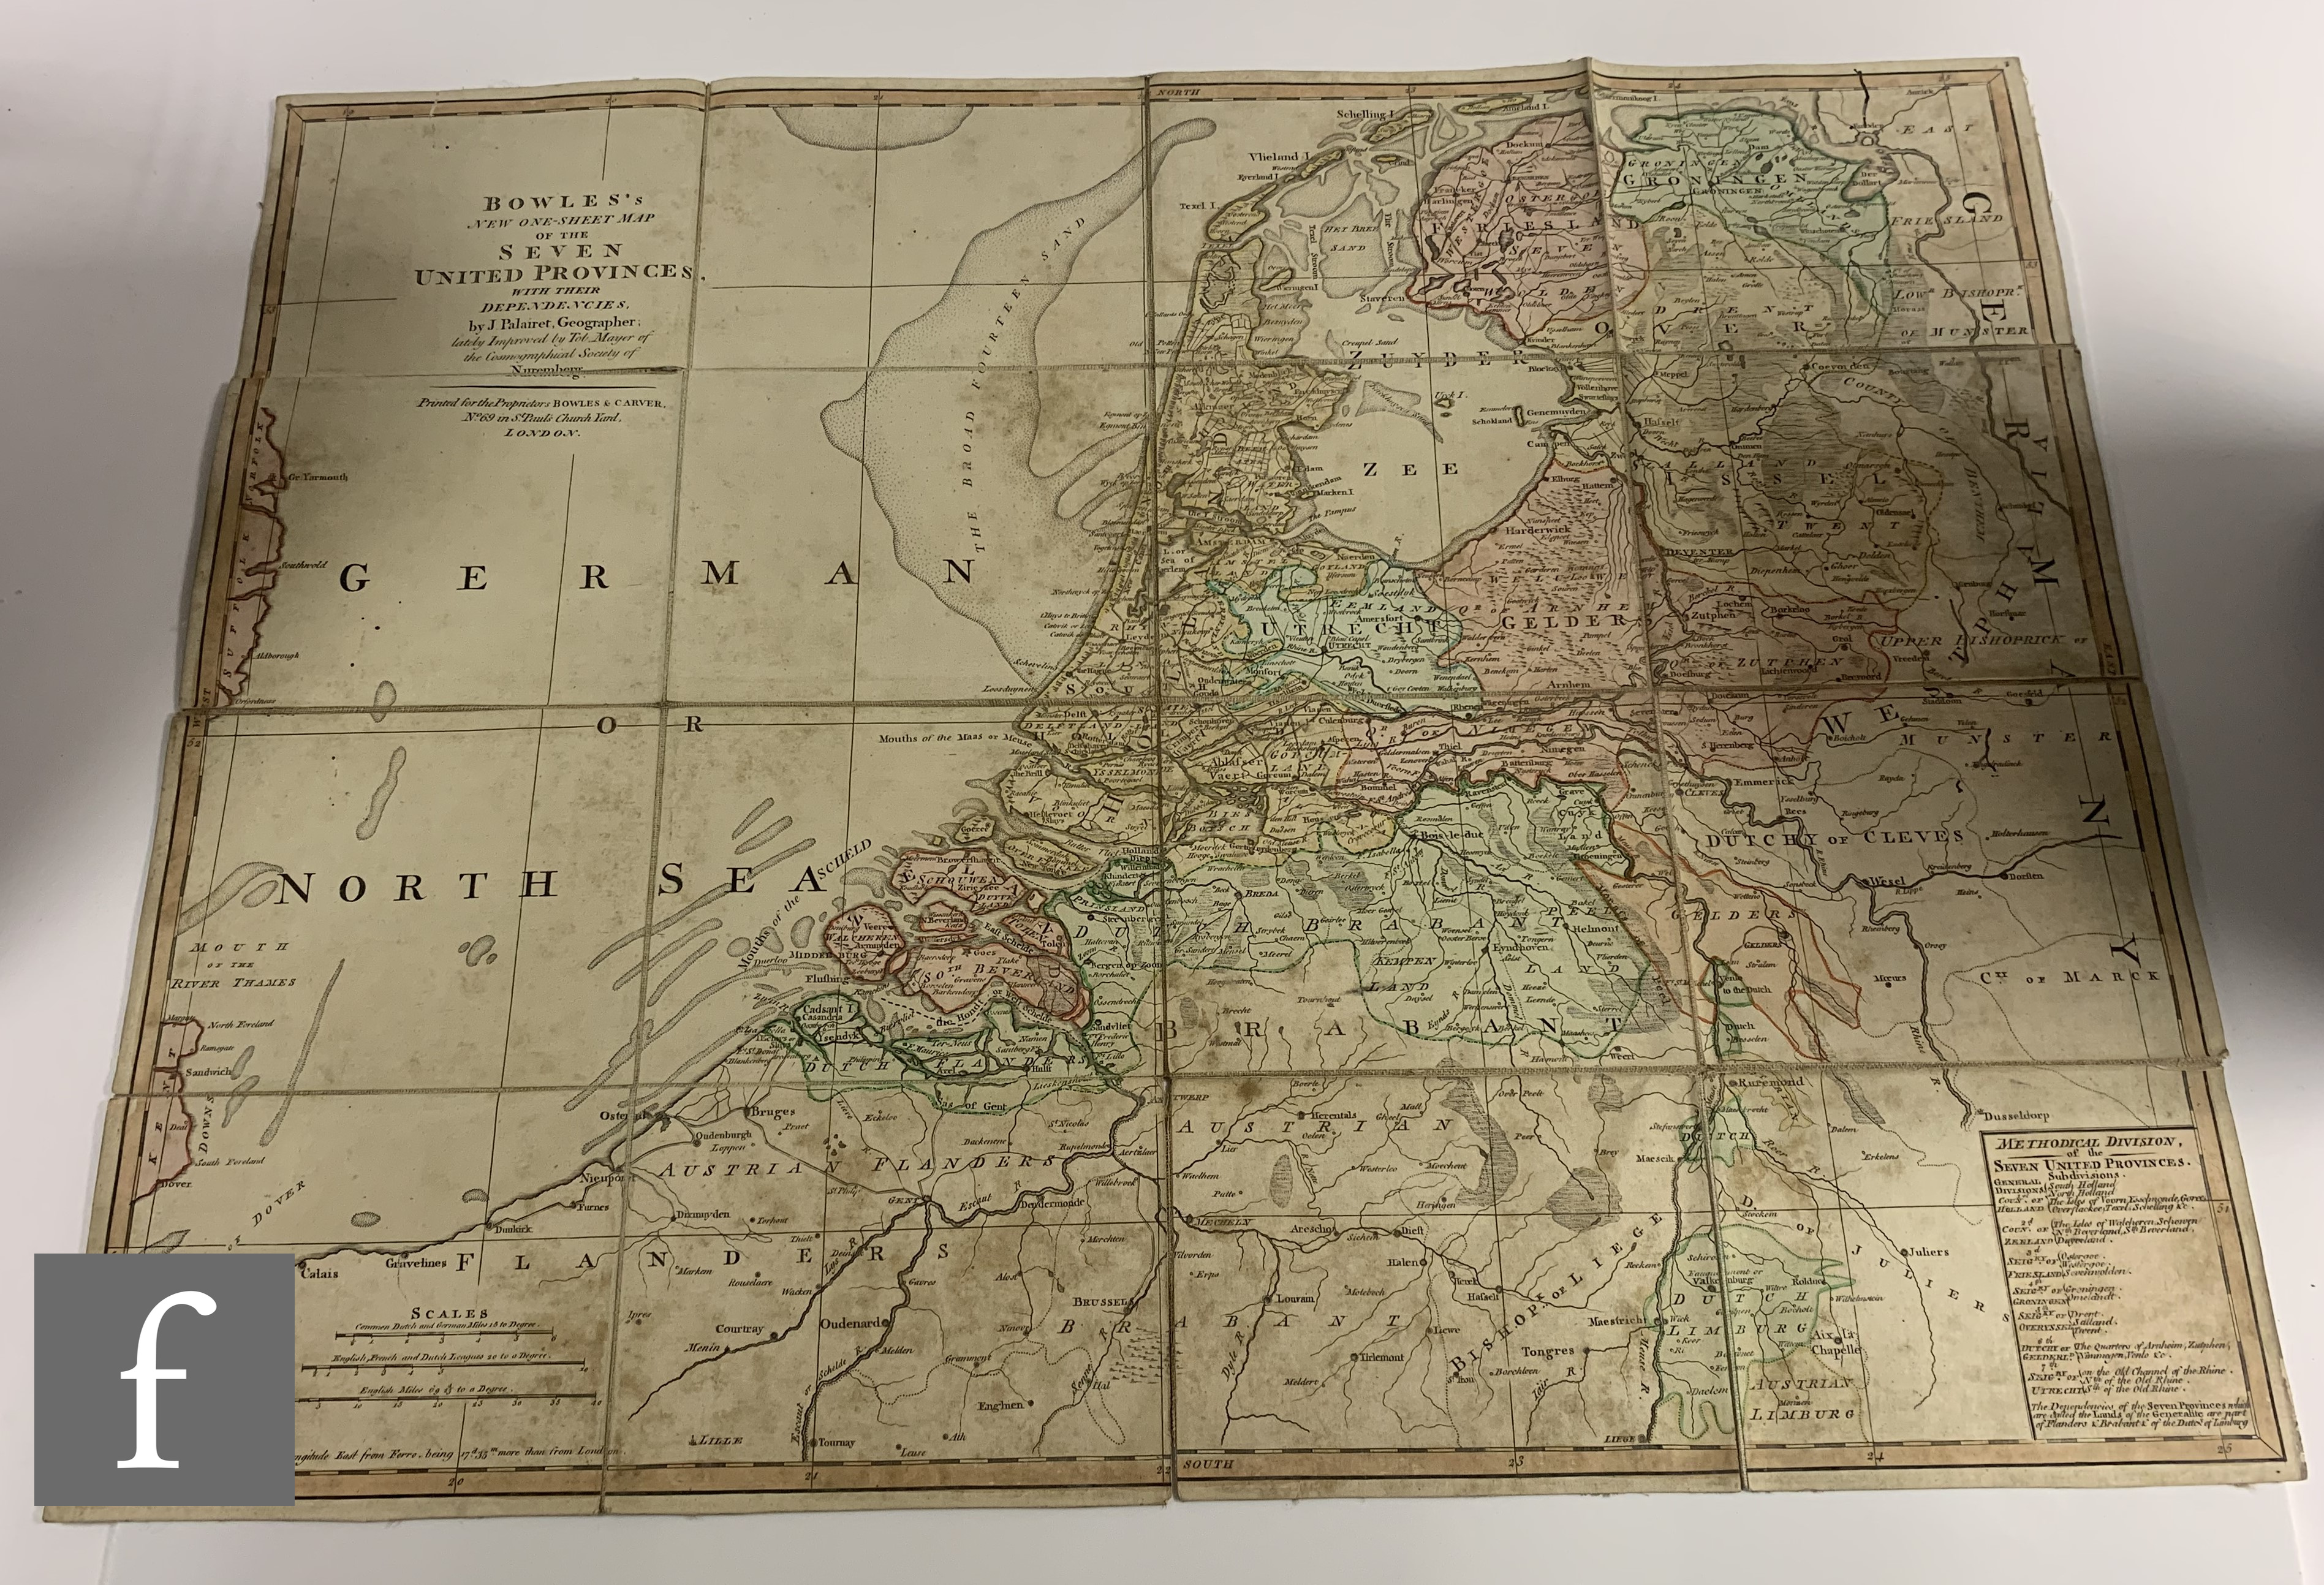 A 19th Century Cary's folding map of England and Wales, another Bowle's Seven United Provinces of - Image 2 of 5